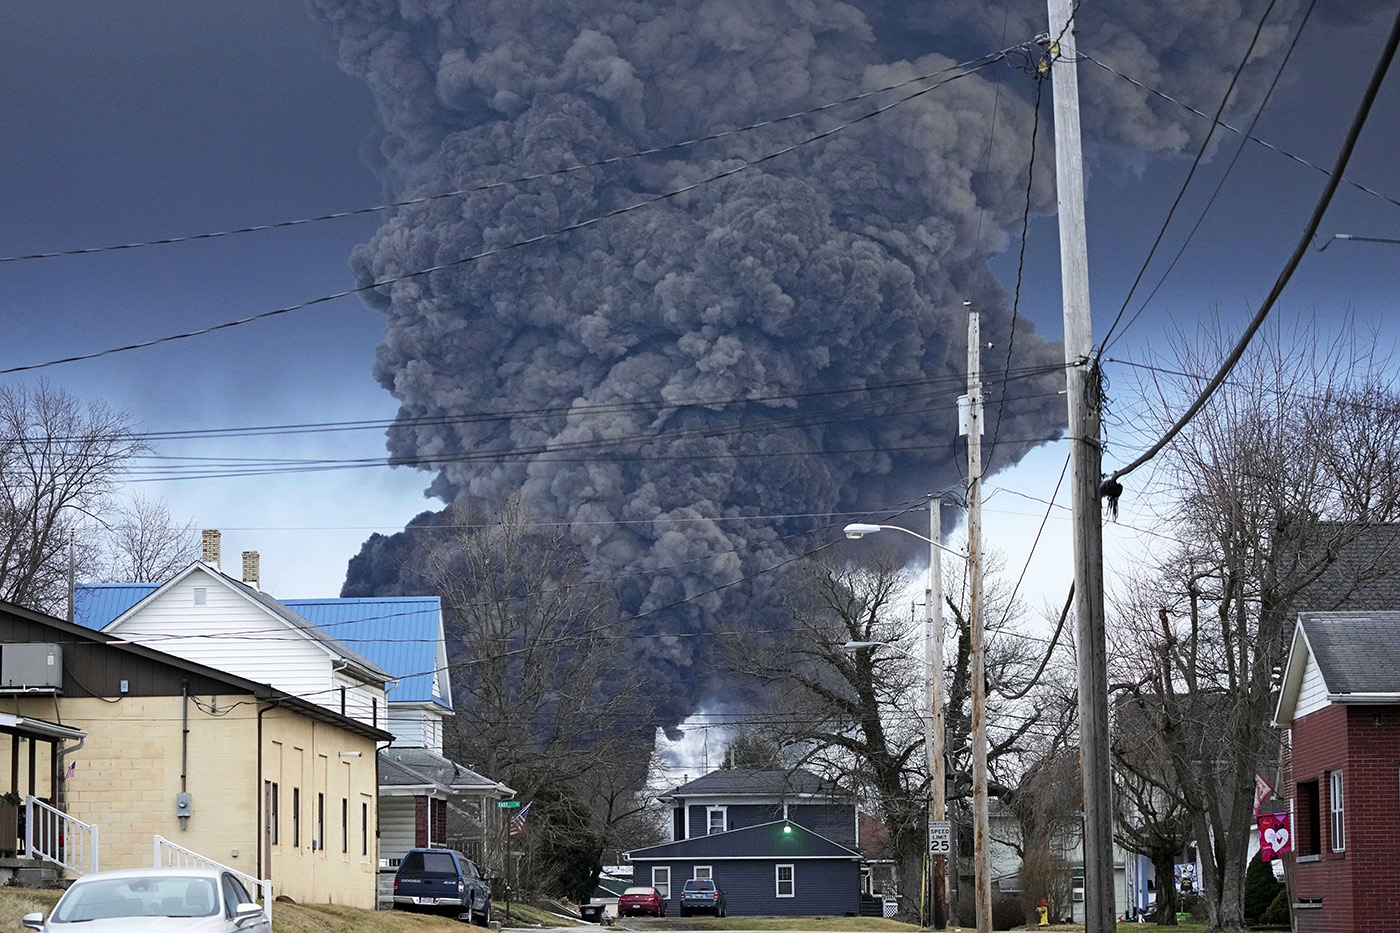 A cloud of black smoke fills the sky over homes and businesses over an Ohio town.